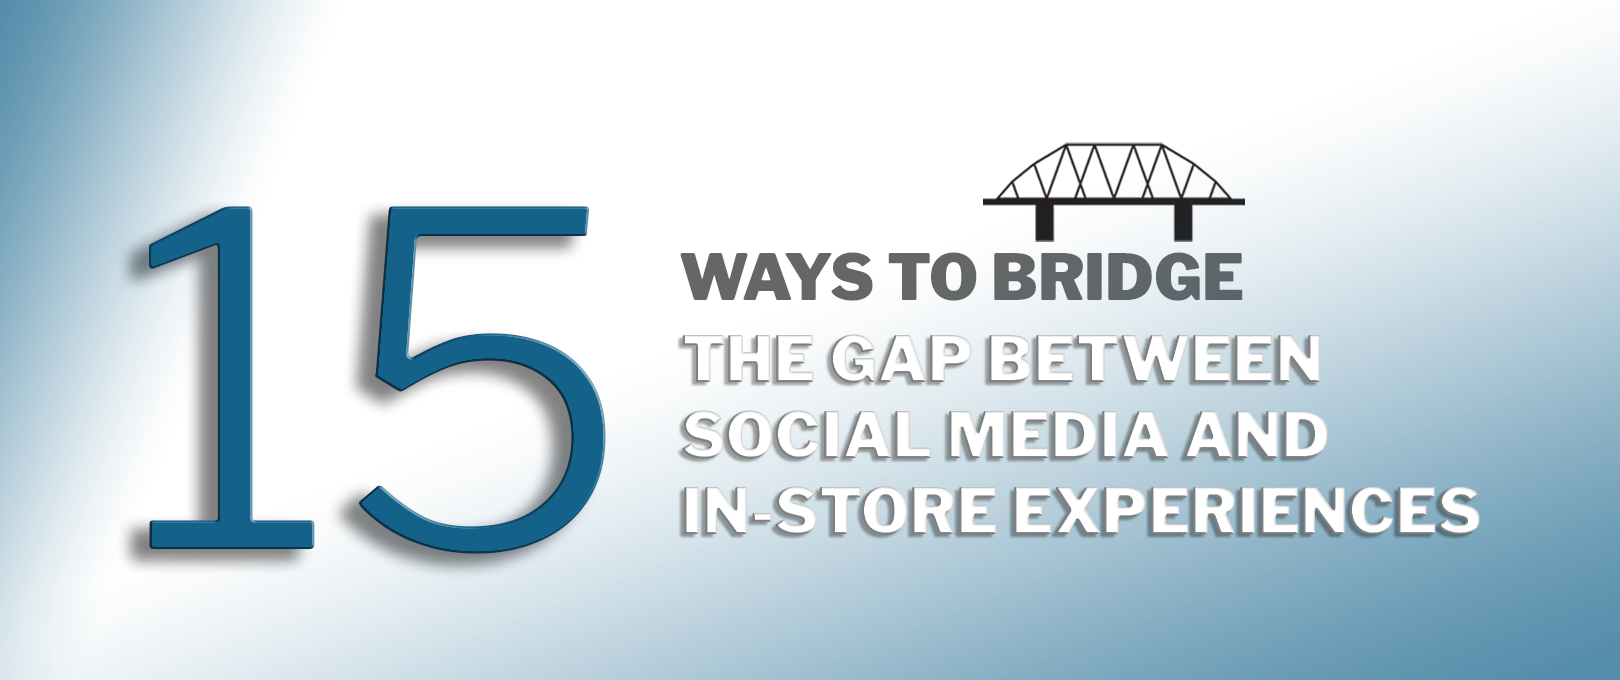 15-Ways-To-Bridge-The-Gap-Between-Social-Media-And-In-Store-Experiences